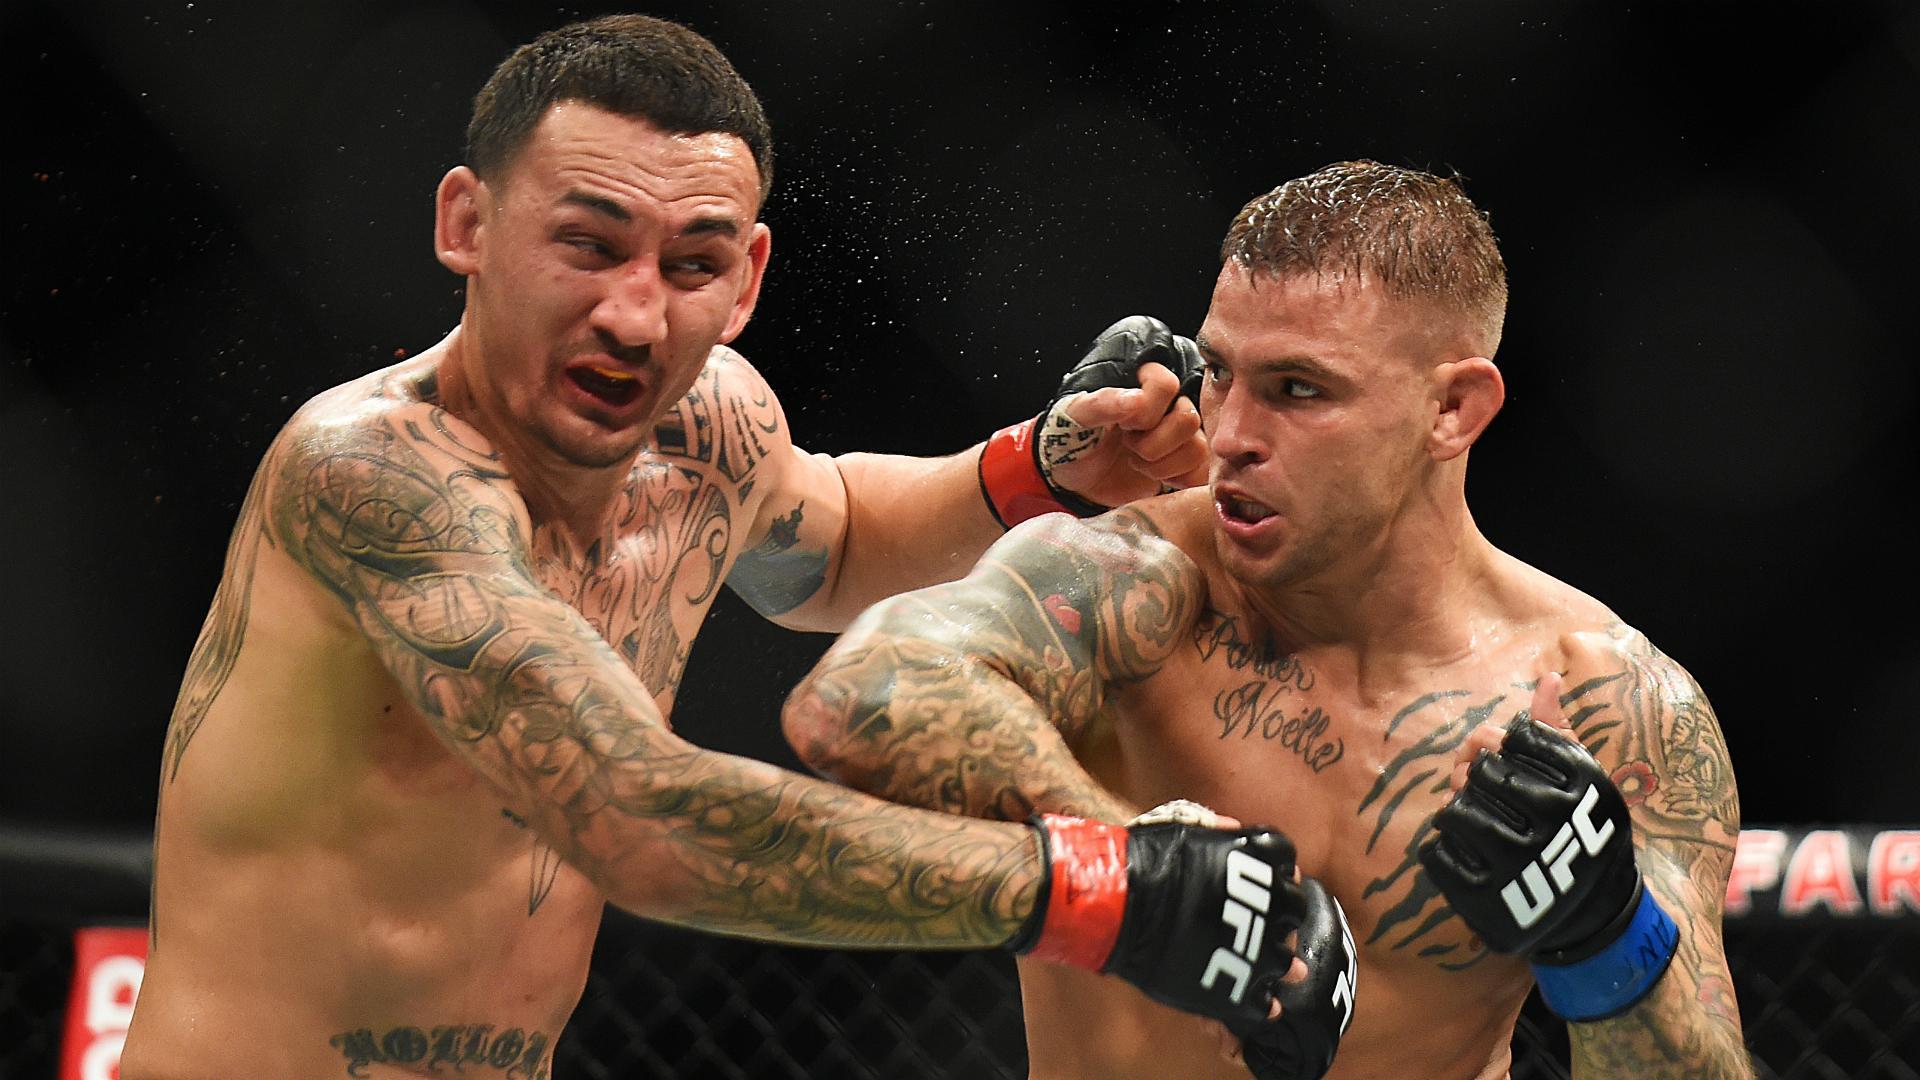 Poirier outlasts Holloway in UFC classic and immediately calls out